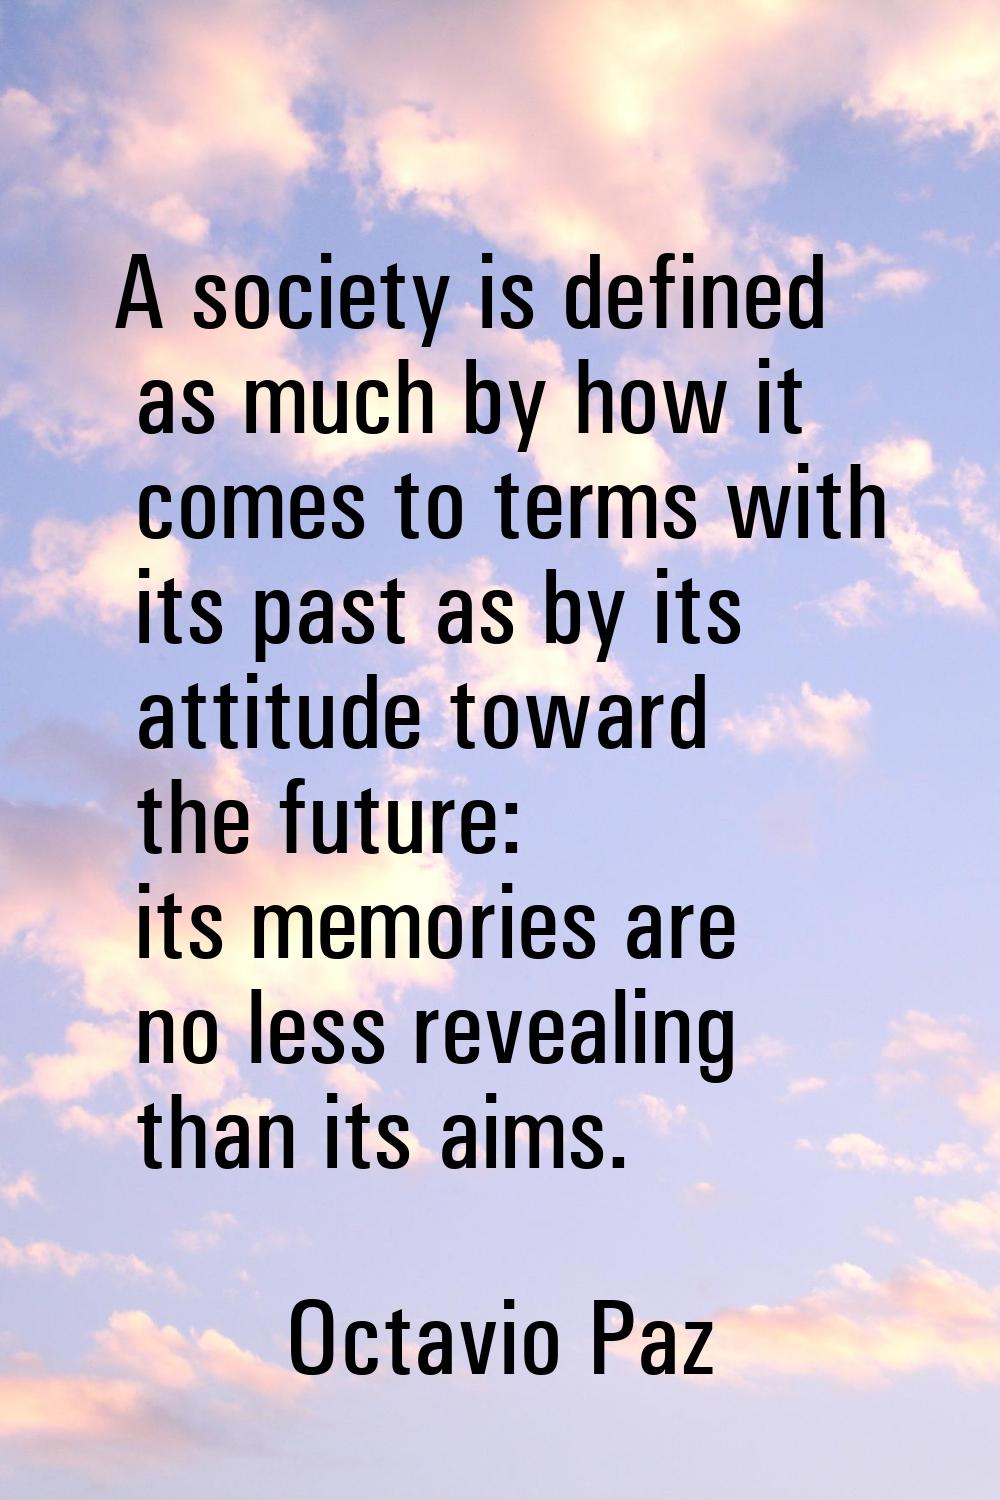 A society is defined as much by how it comes to terms with its past as by its attitude toward the f